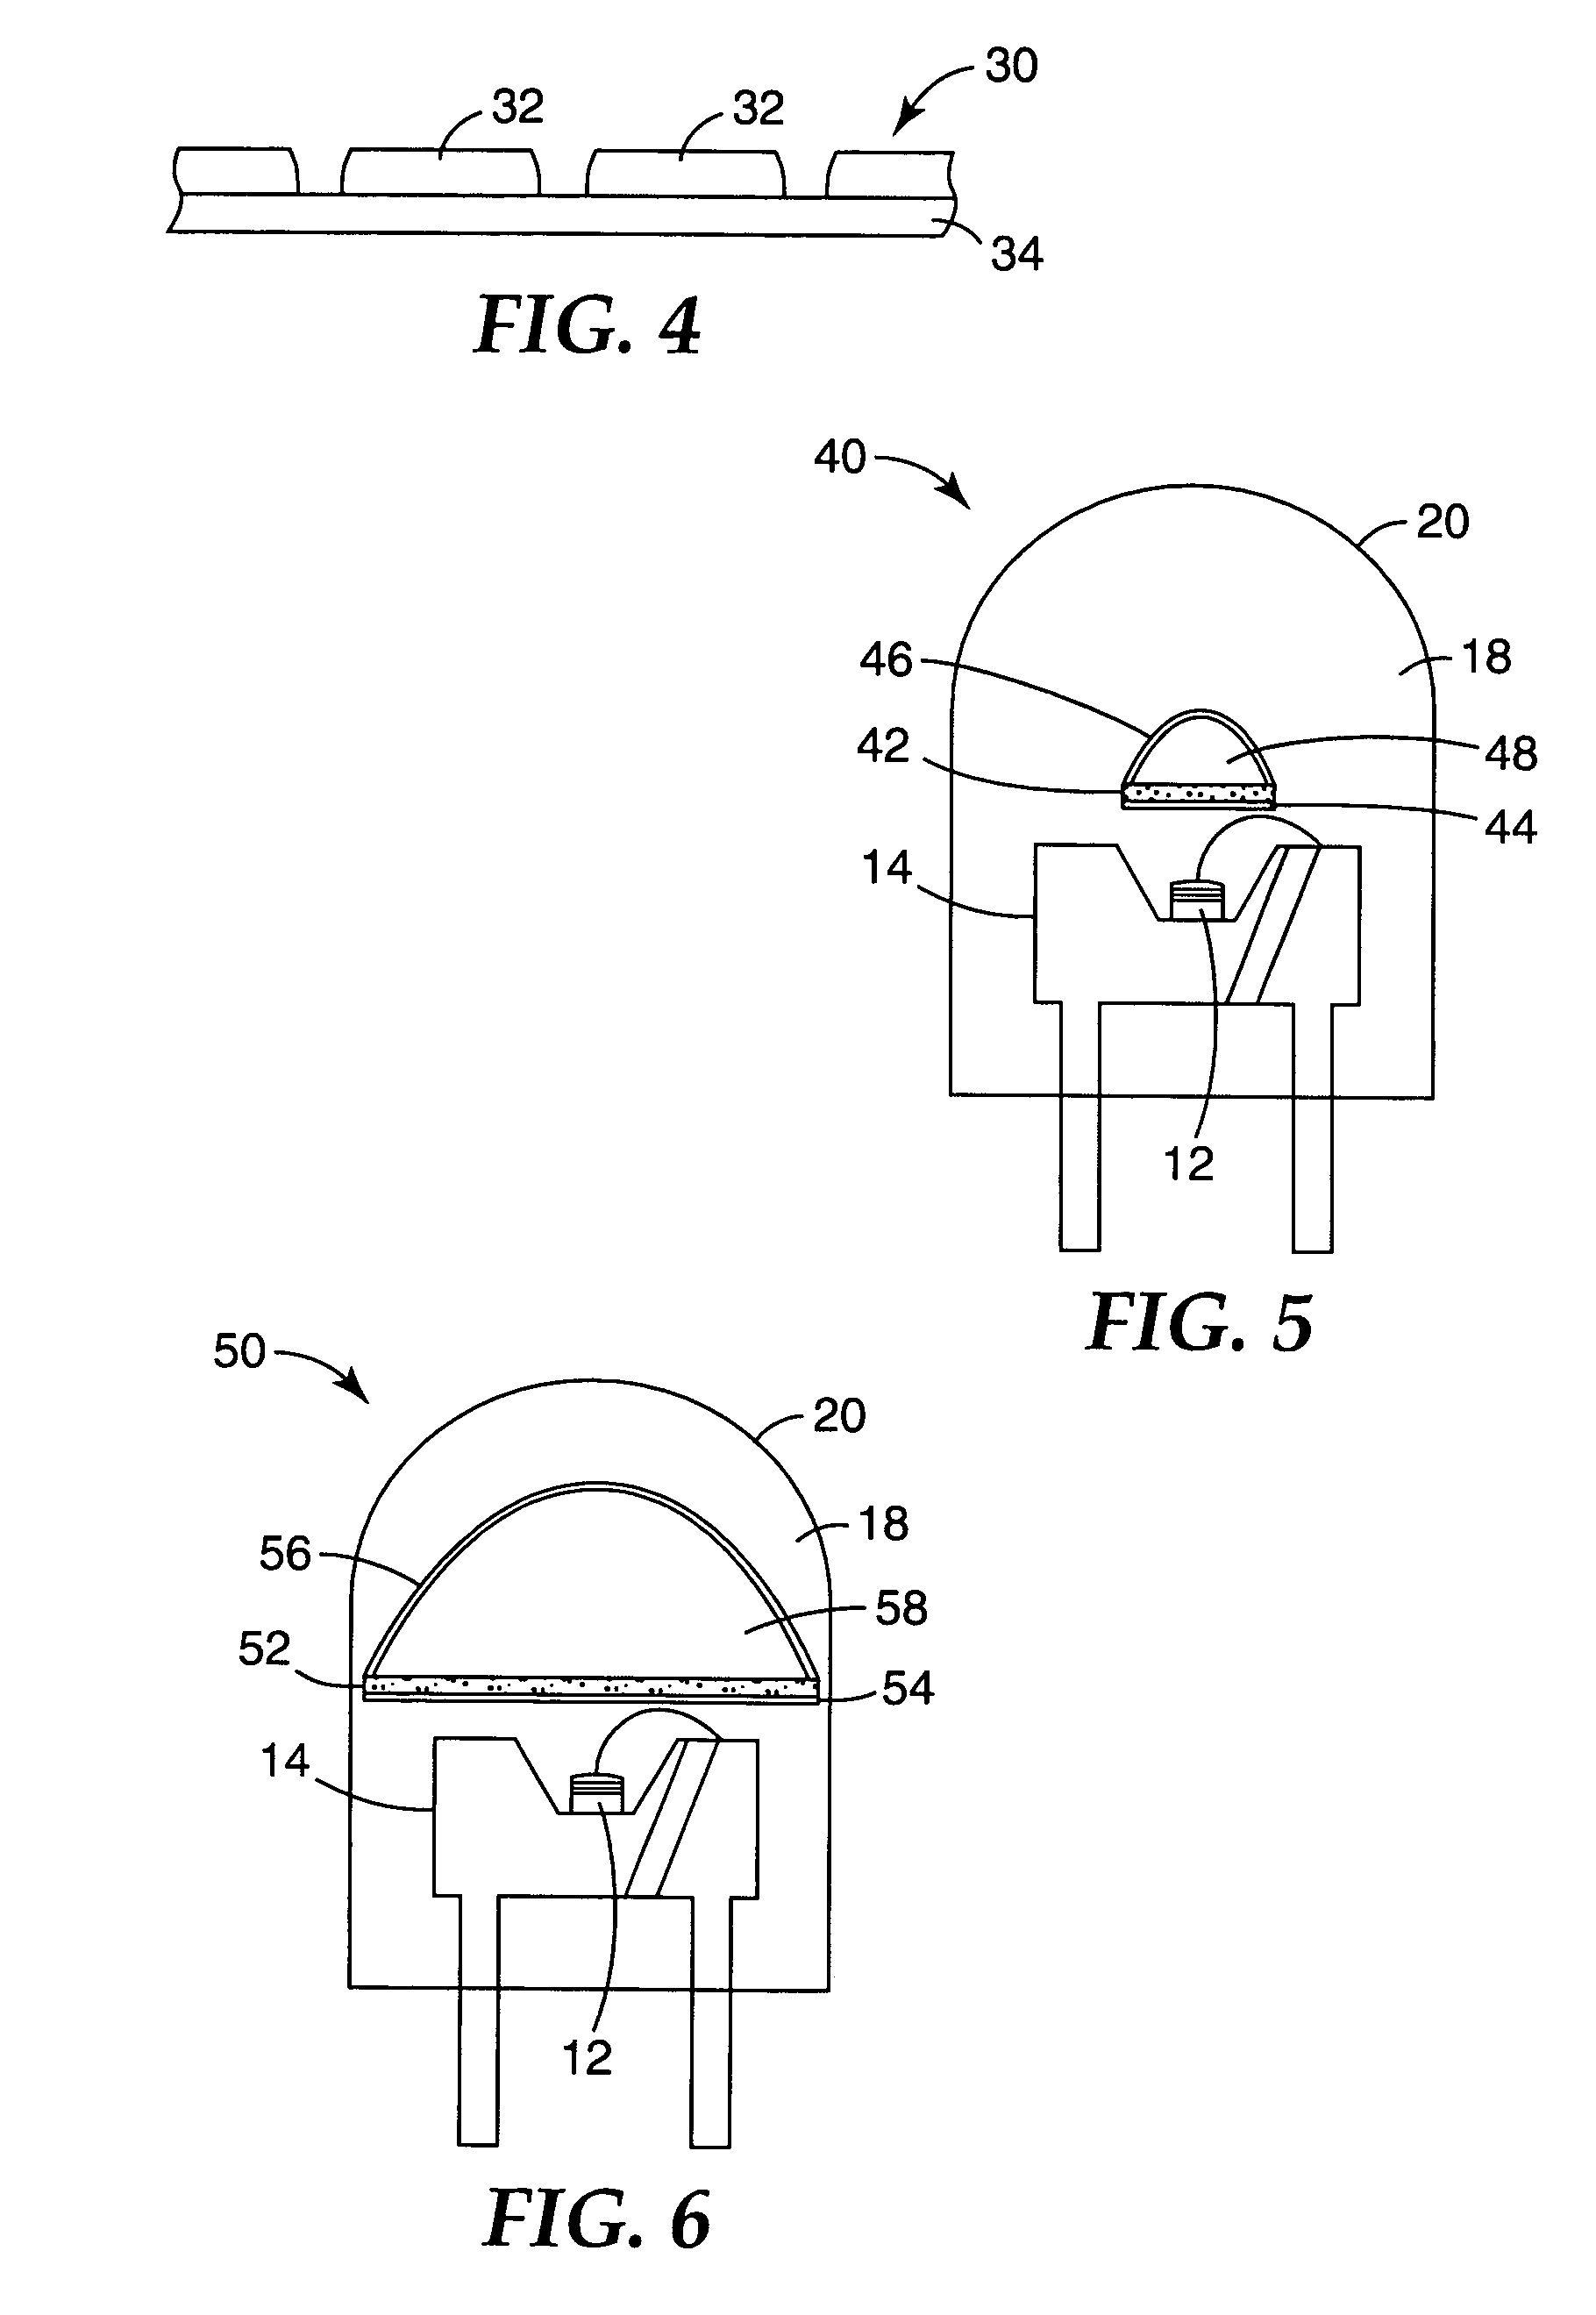 Phosphor based light sources having a polymeric long pass reflector